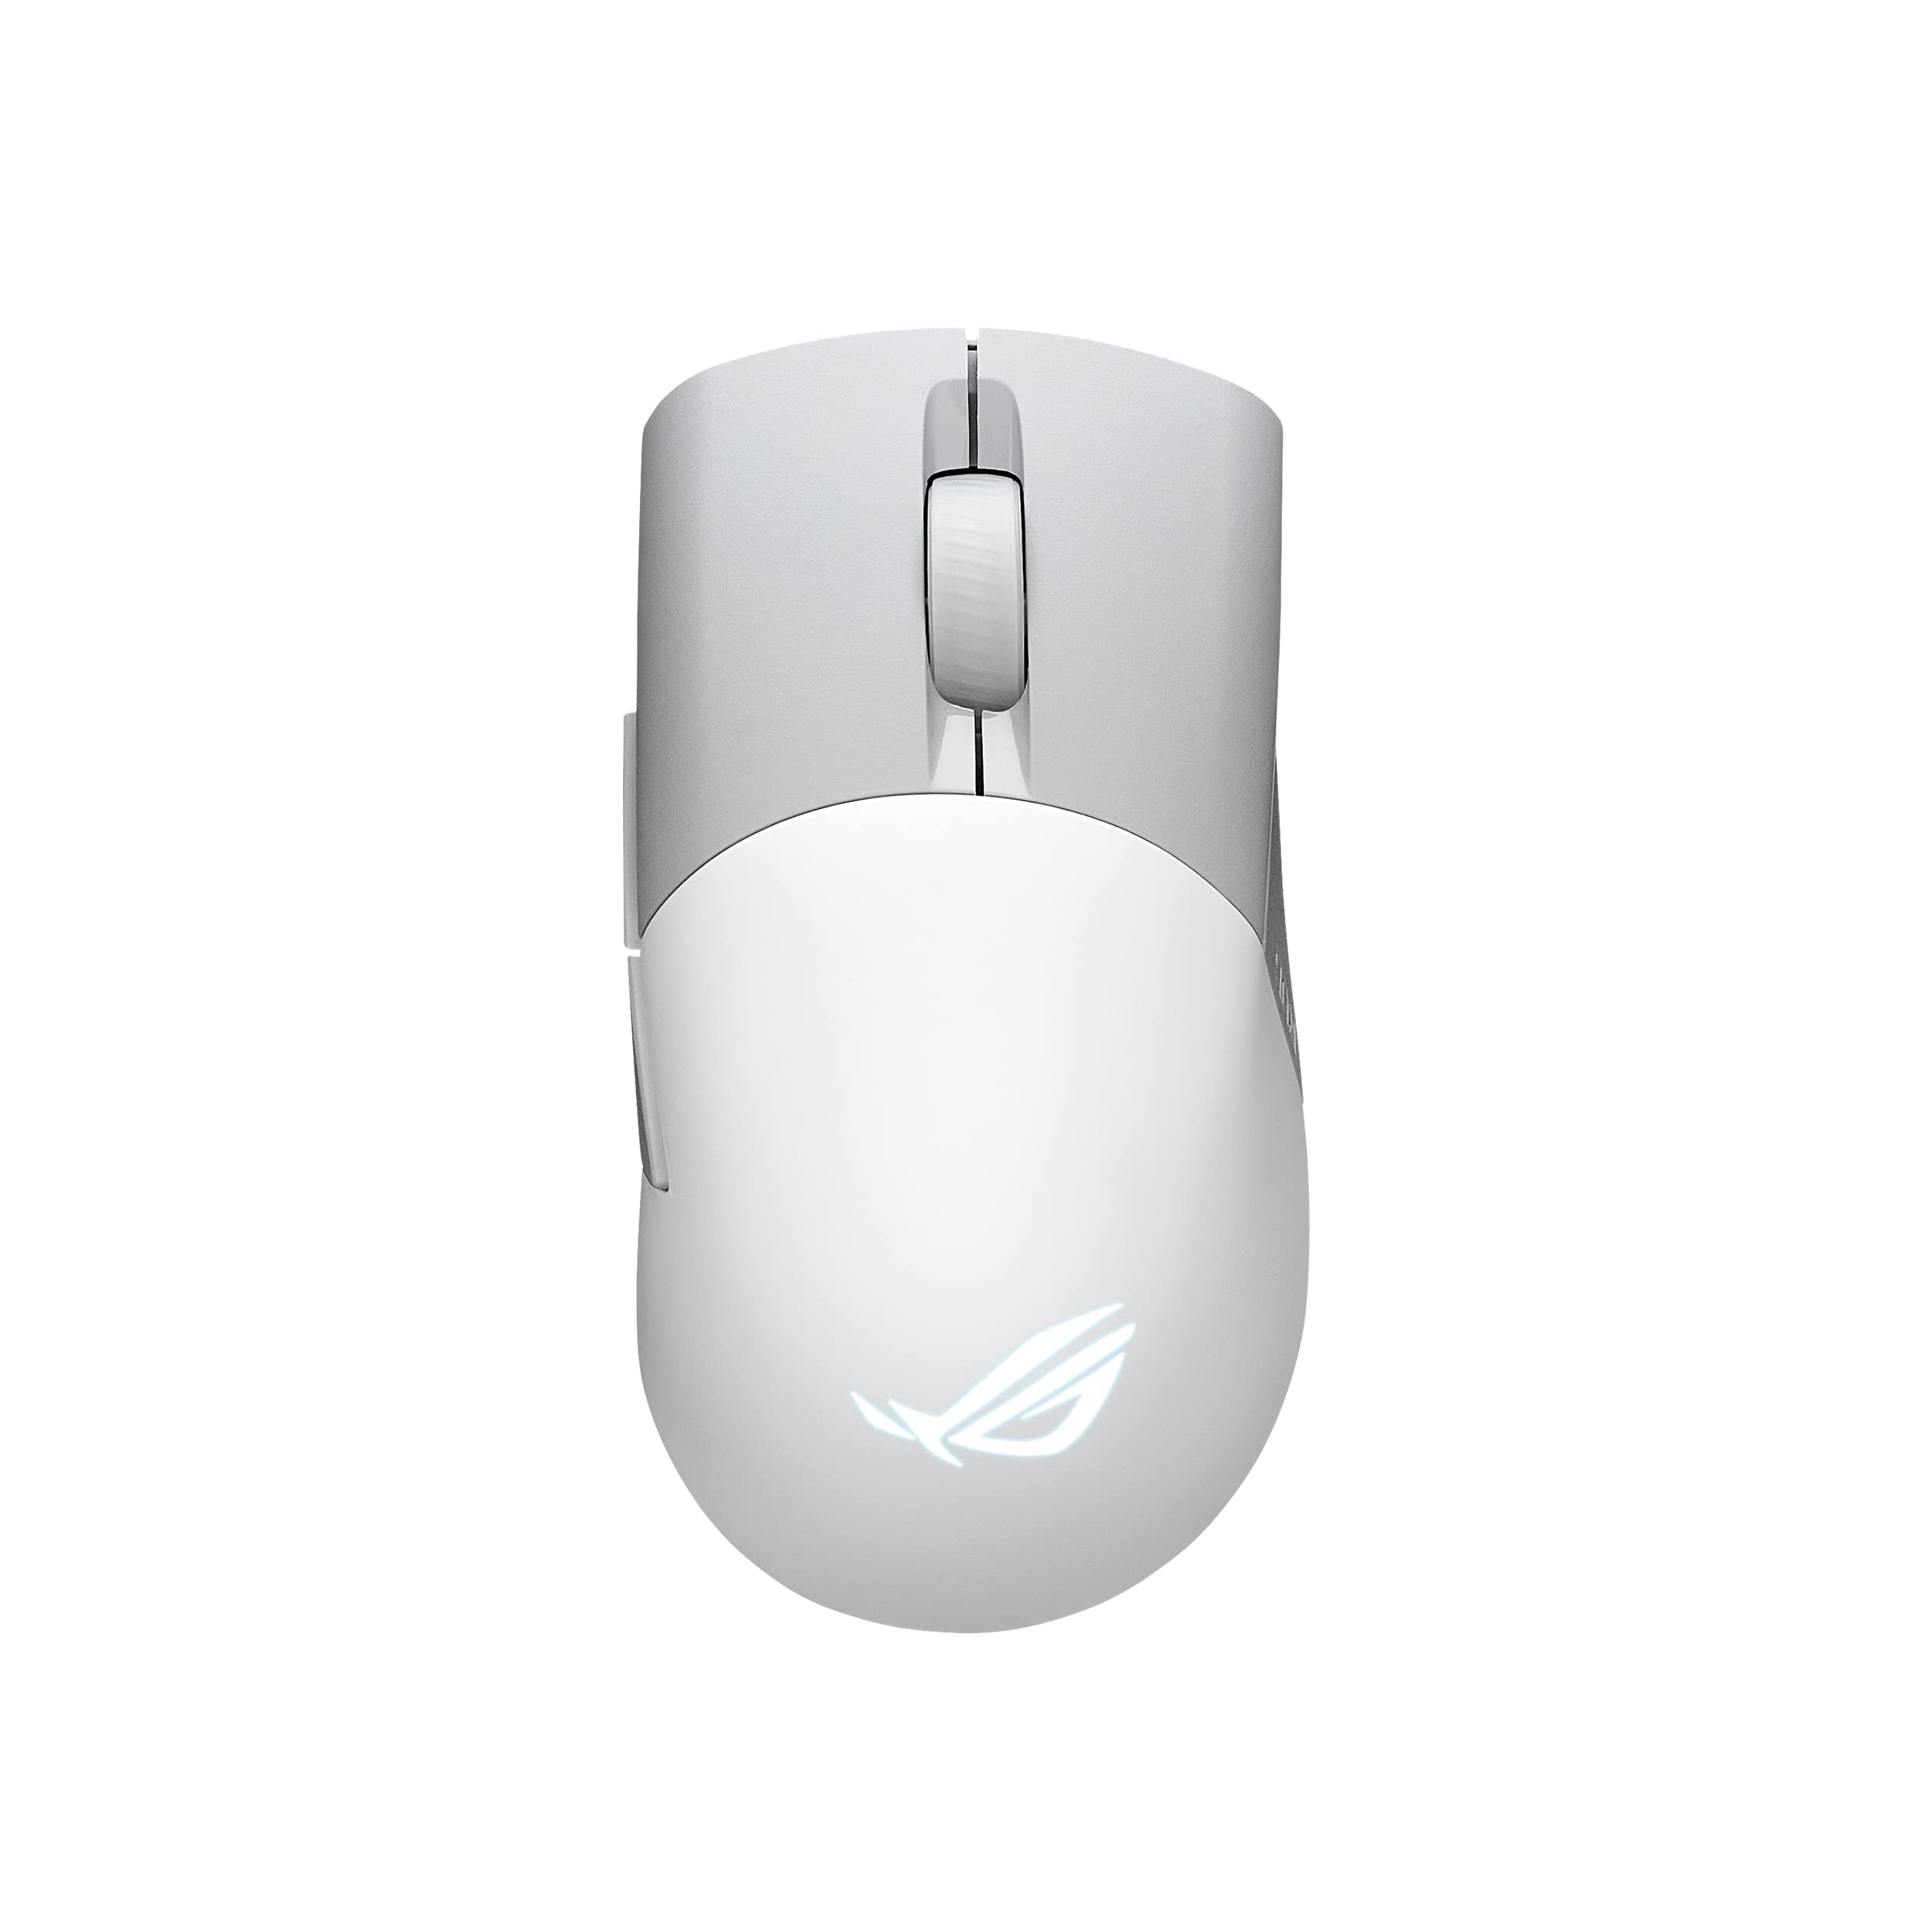 Asus ROG Keris Wireless AimPoint Gaming Mouse Tri-mode connectivity 2.4GHz RF Bluetooth Wired 36000 DPI sensor 5 progr